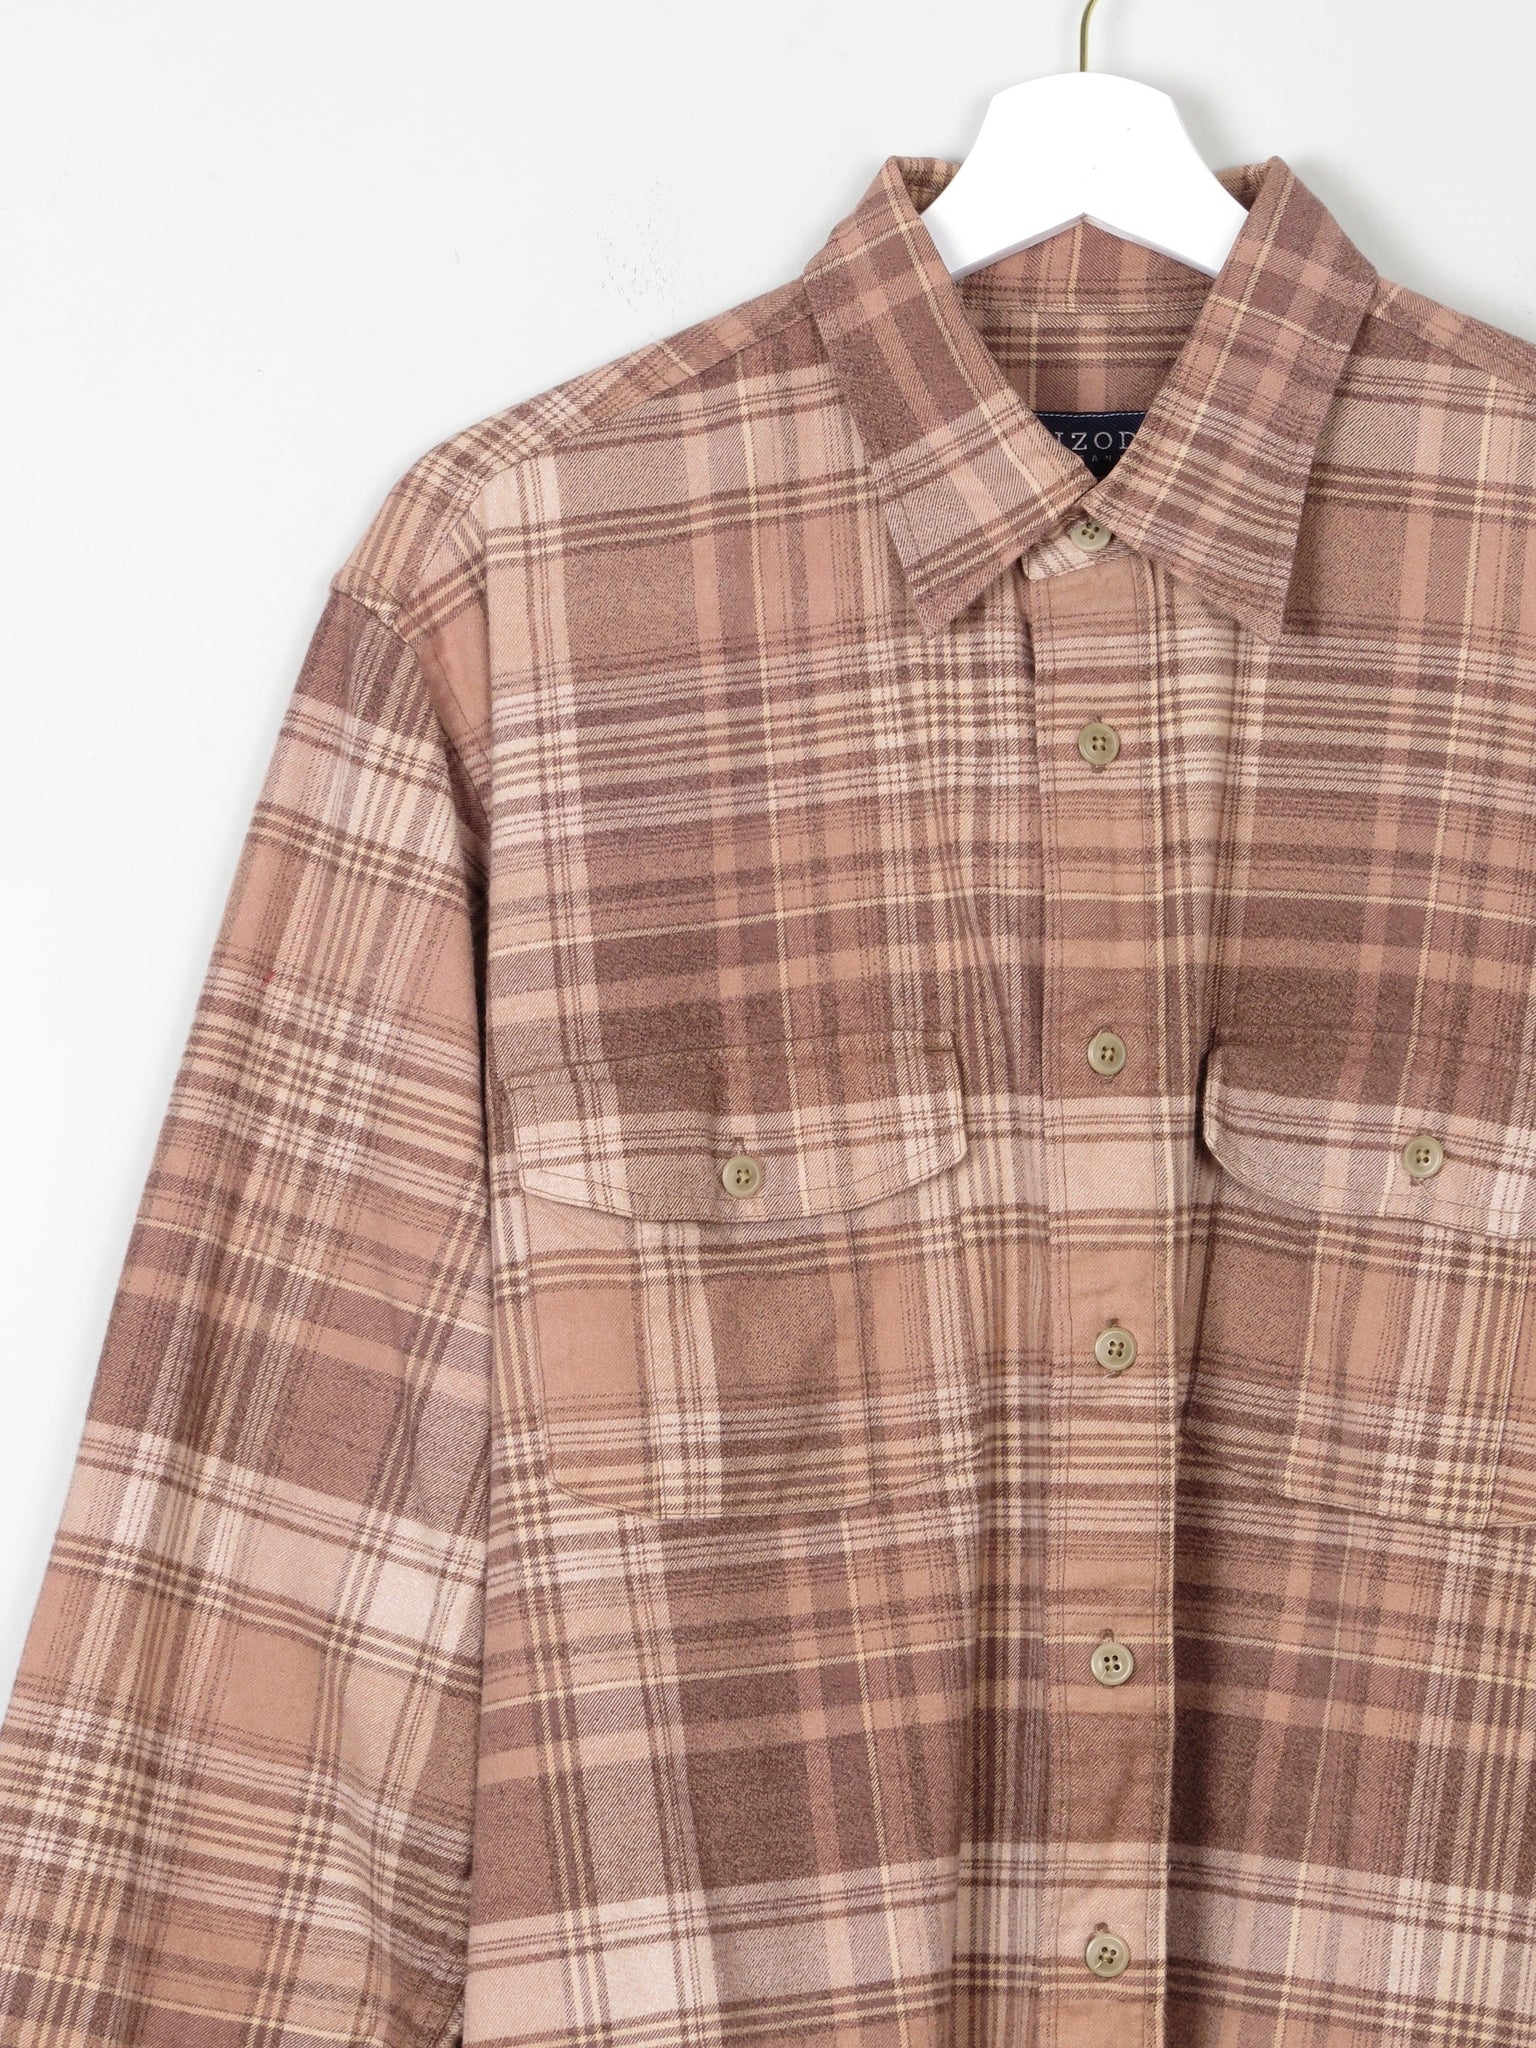 Men's Check Brown Flannel Shirt M - The Harlequin